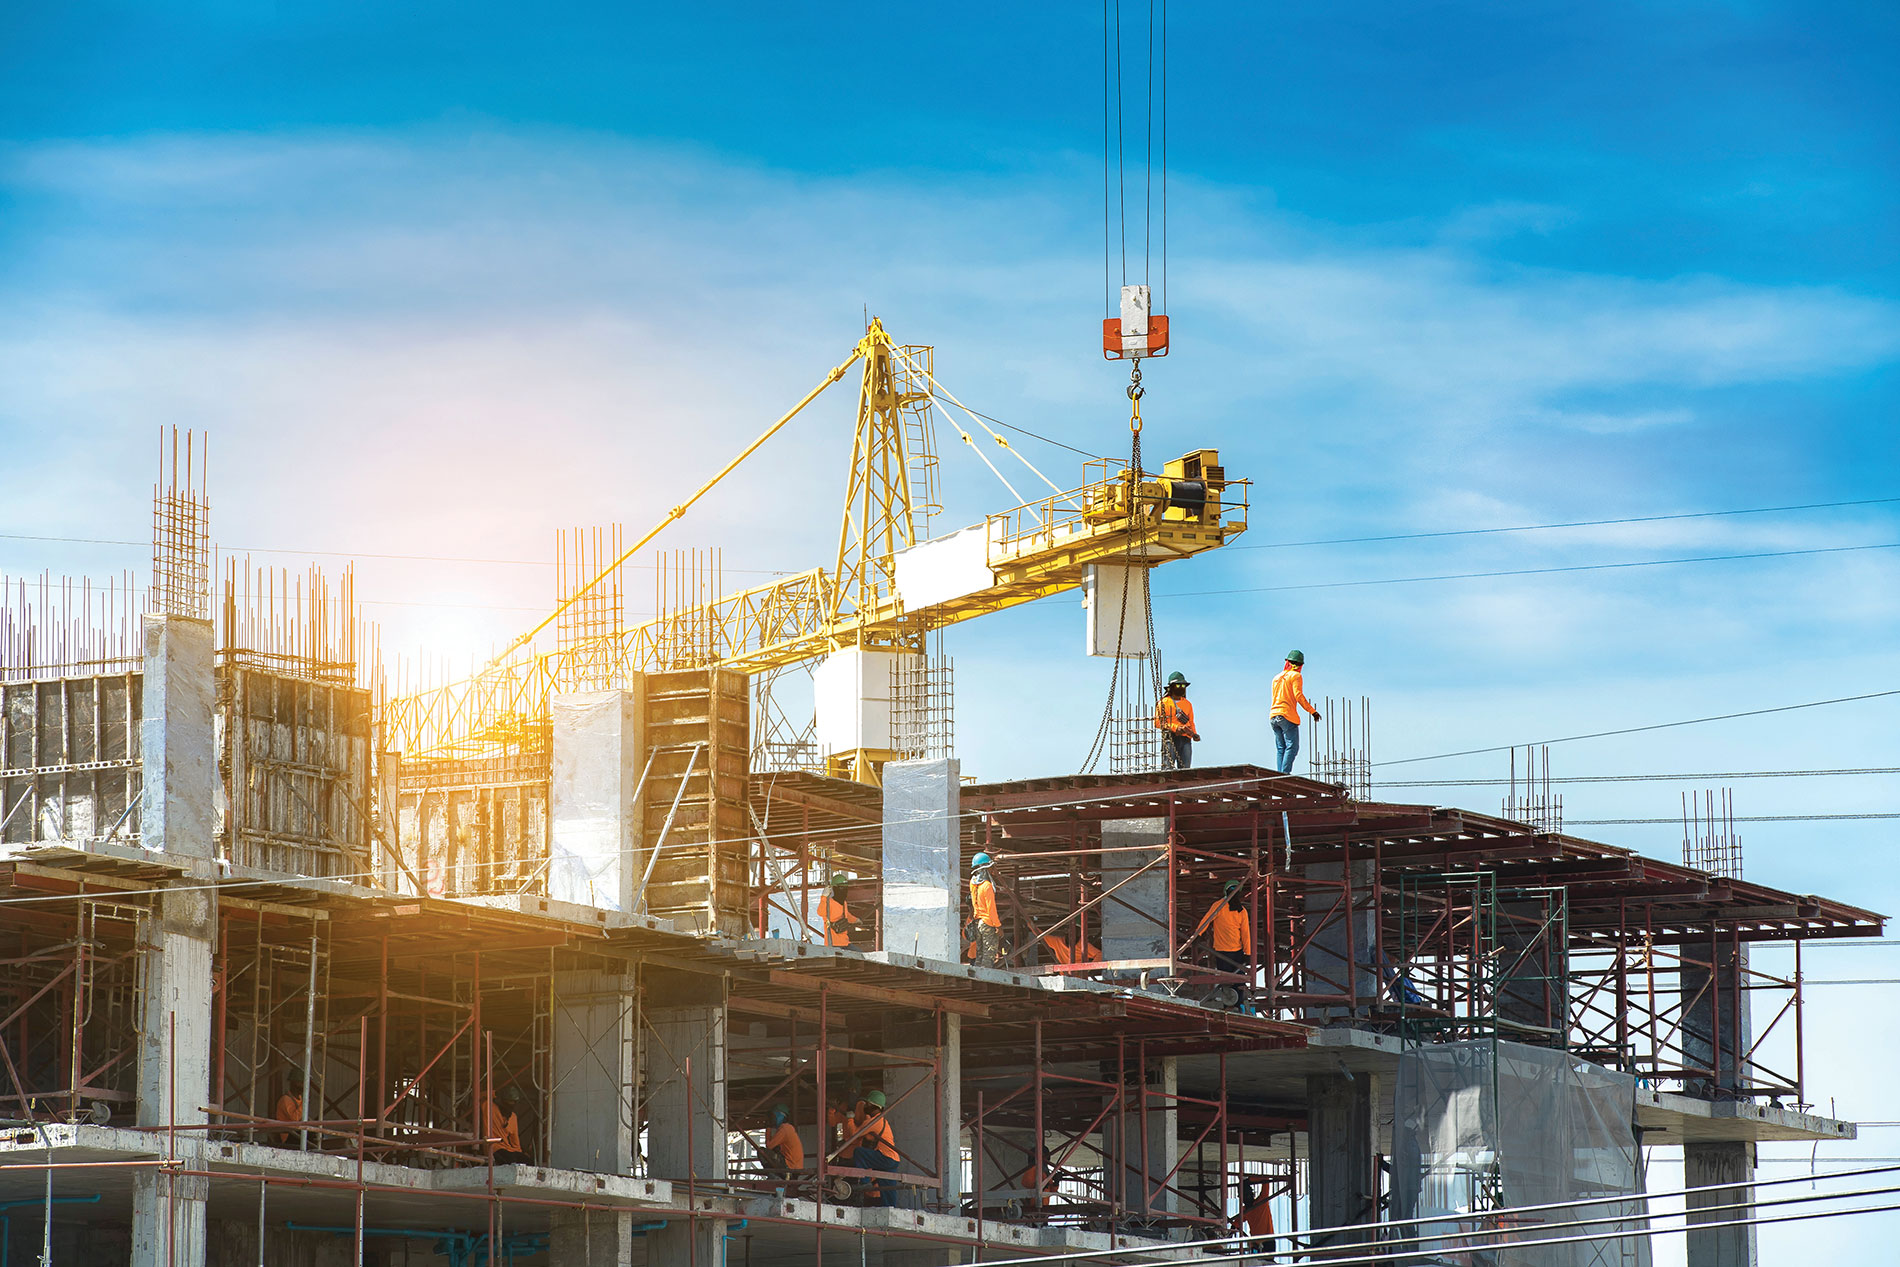 The Basic Knowledge You Need in Building Construction